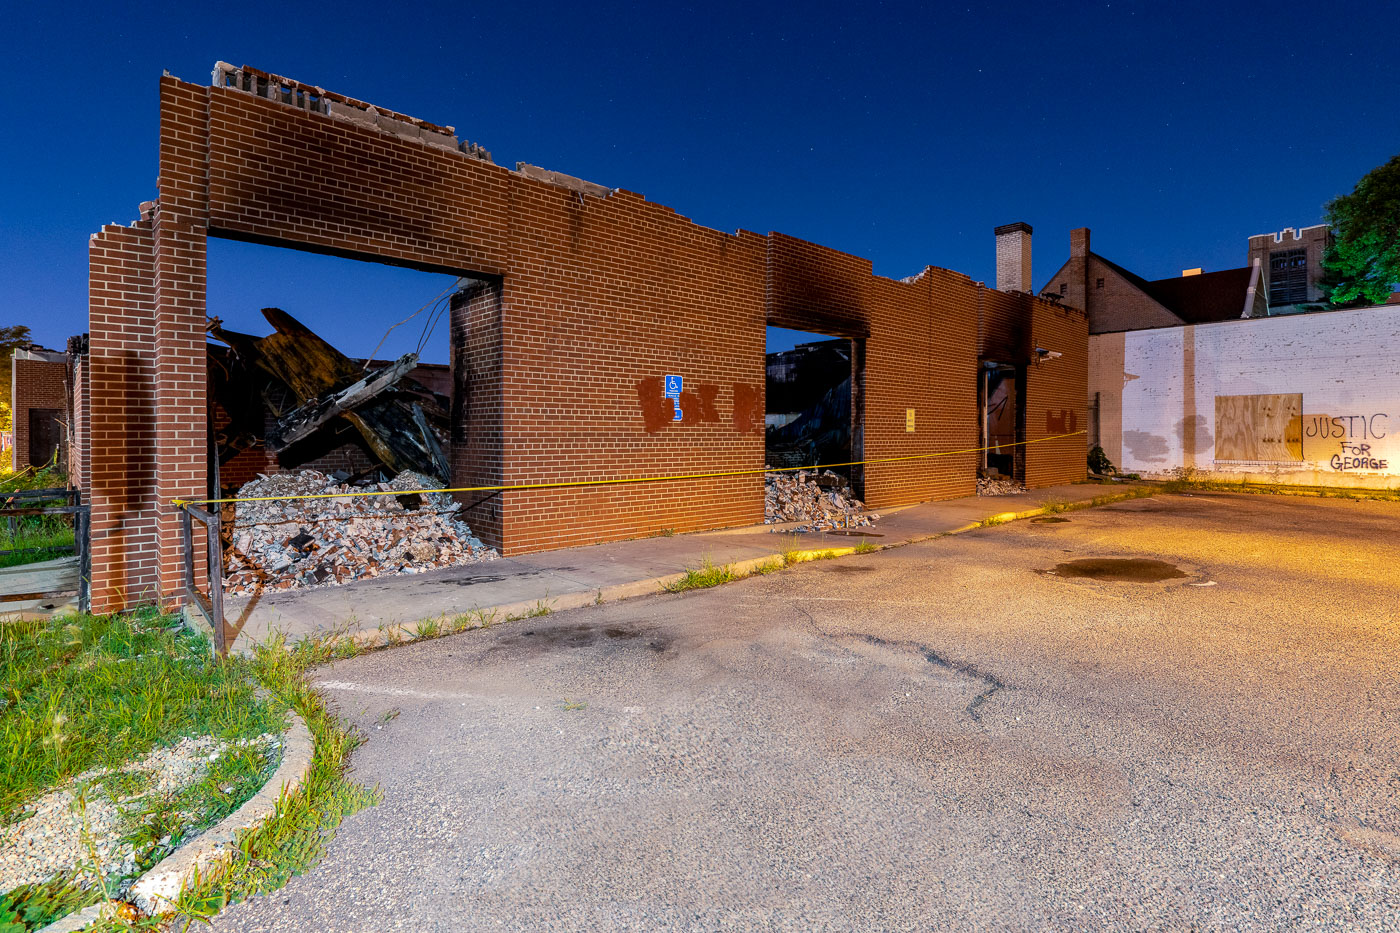 The remains of a burned out USPS post office